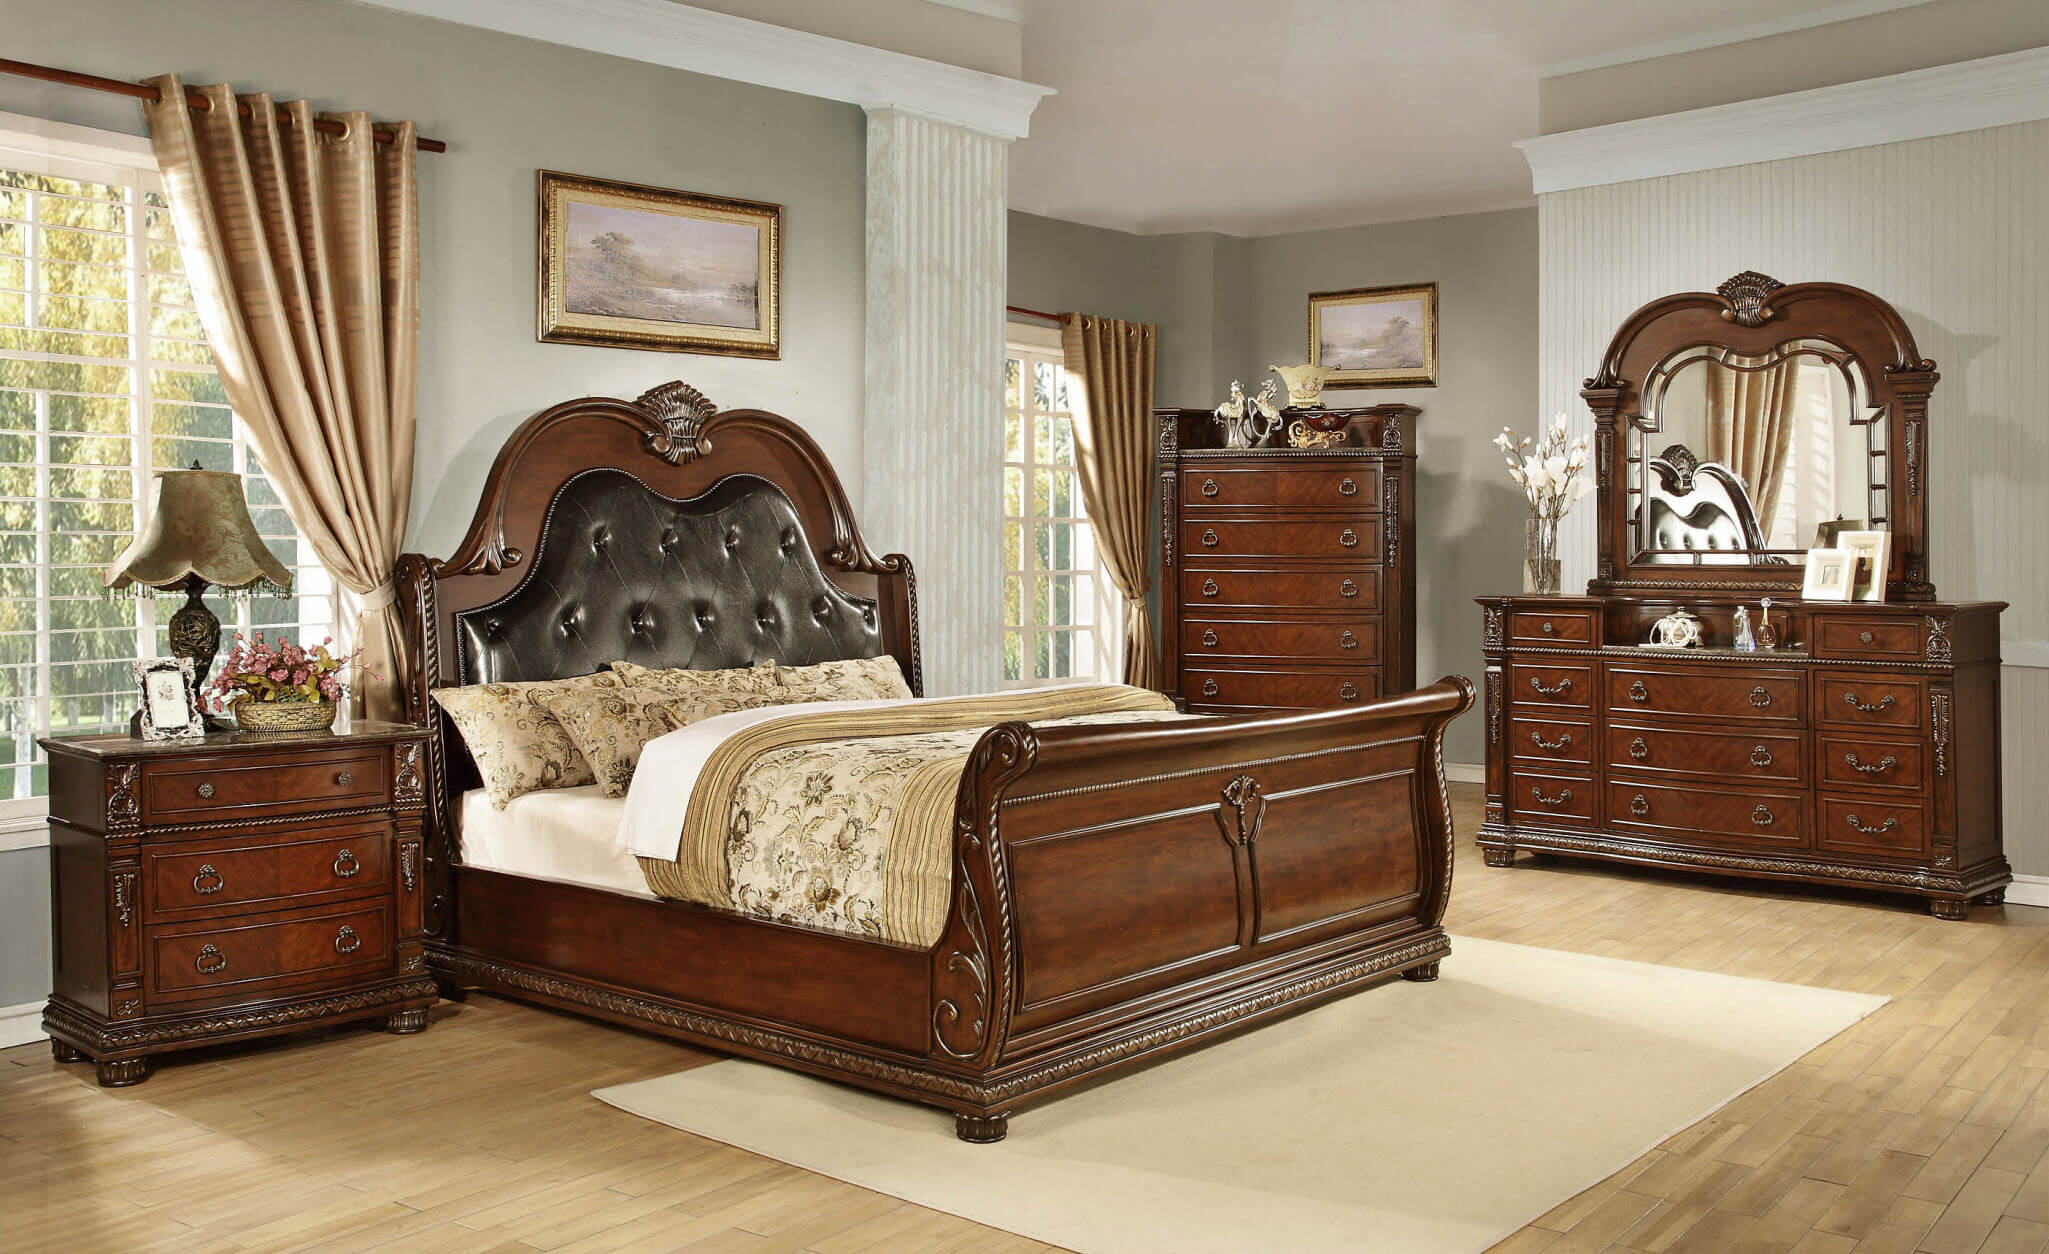 B718 Palace Marble Top Bedroom Set Global Trading with regard to size 2049 X 1254